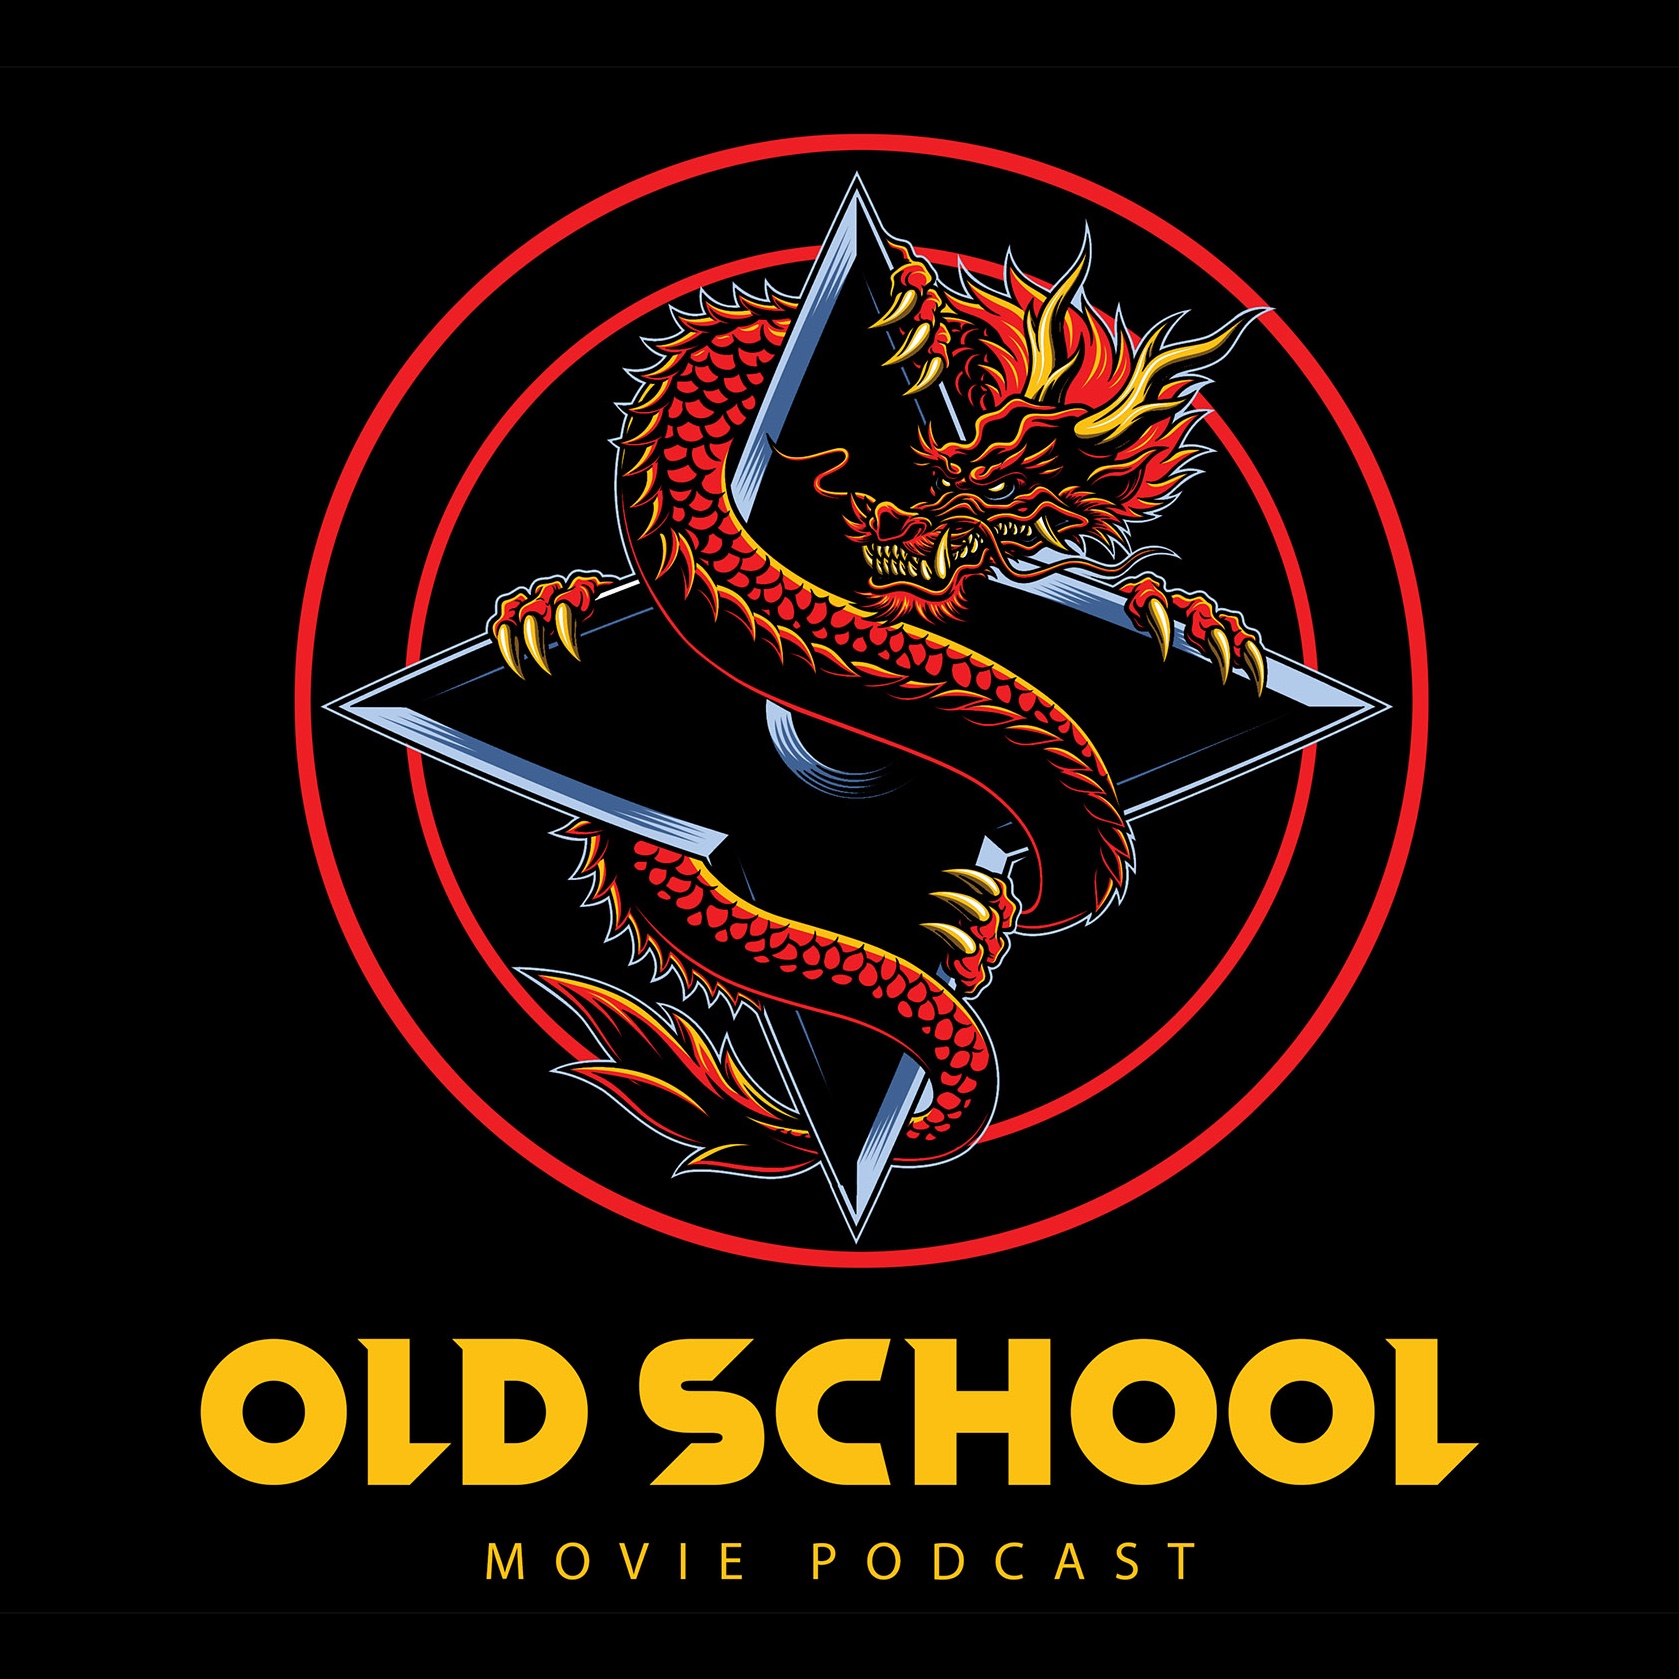 The Old School Movie Podcast